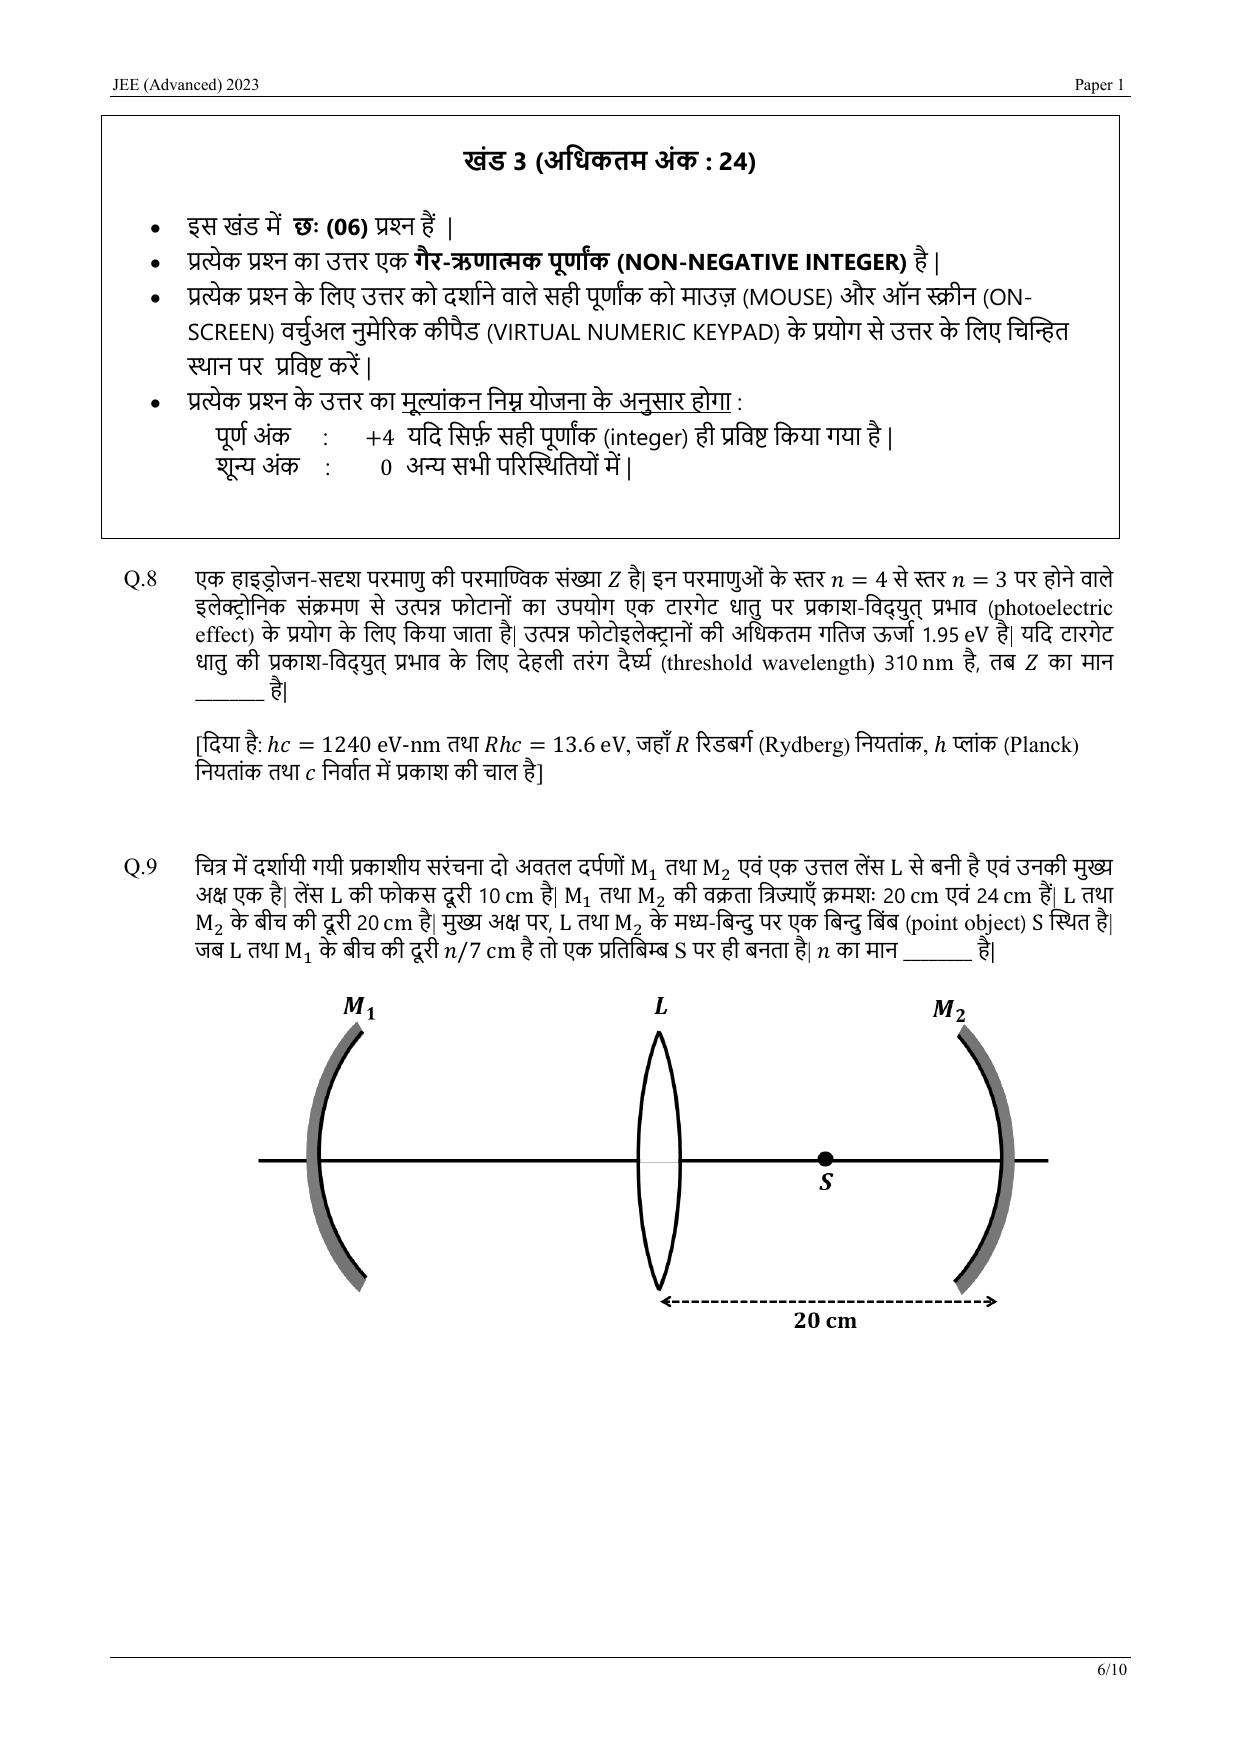 JEE Advanced 2023 Question Paper 1 (Hindi) - Page 16